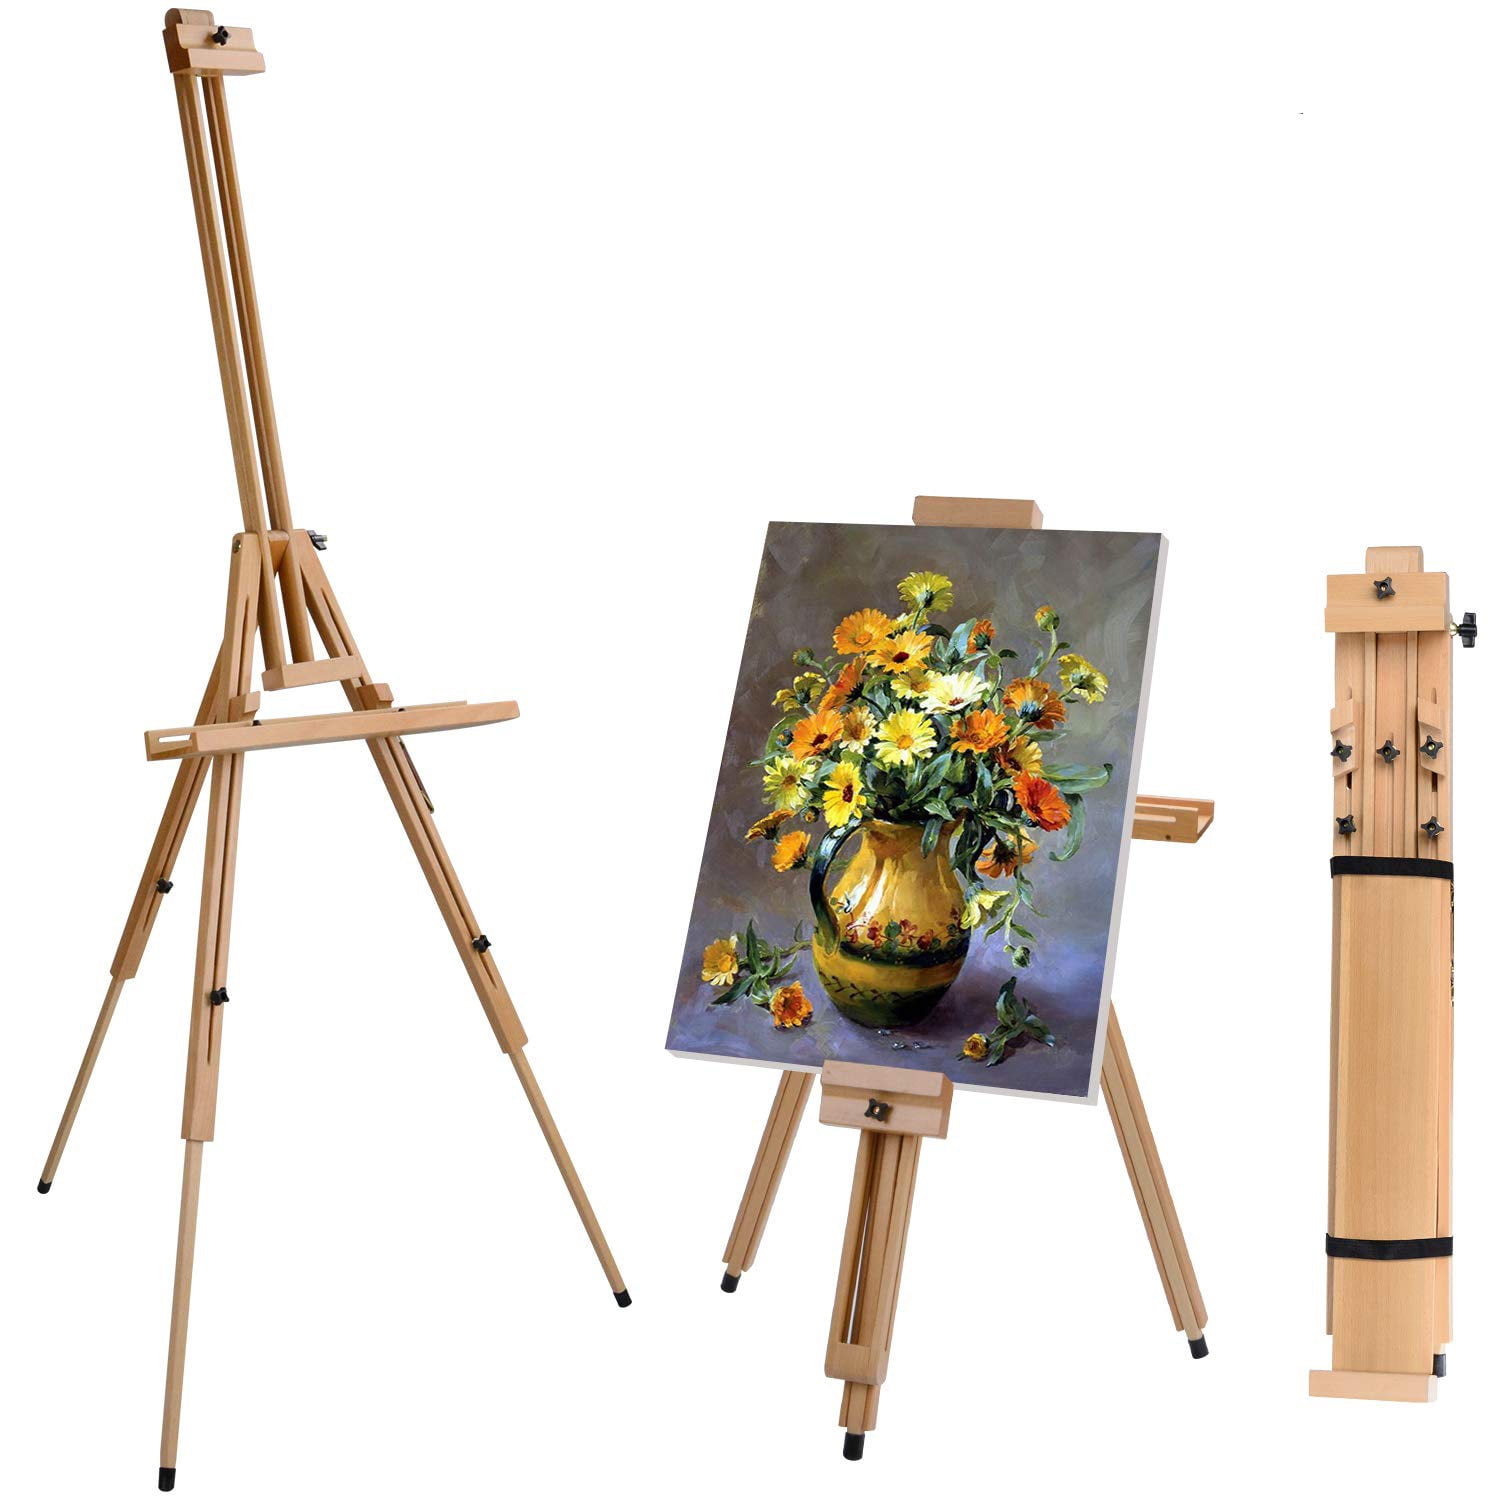 Studio Wood Artists Easel Stand Artist Painting Art Drawing Tripod Full Standing 